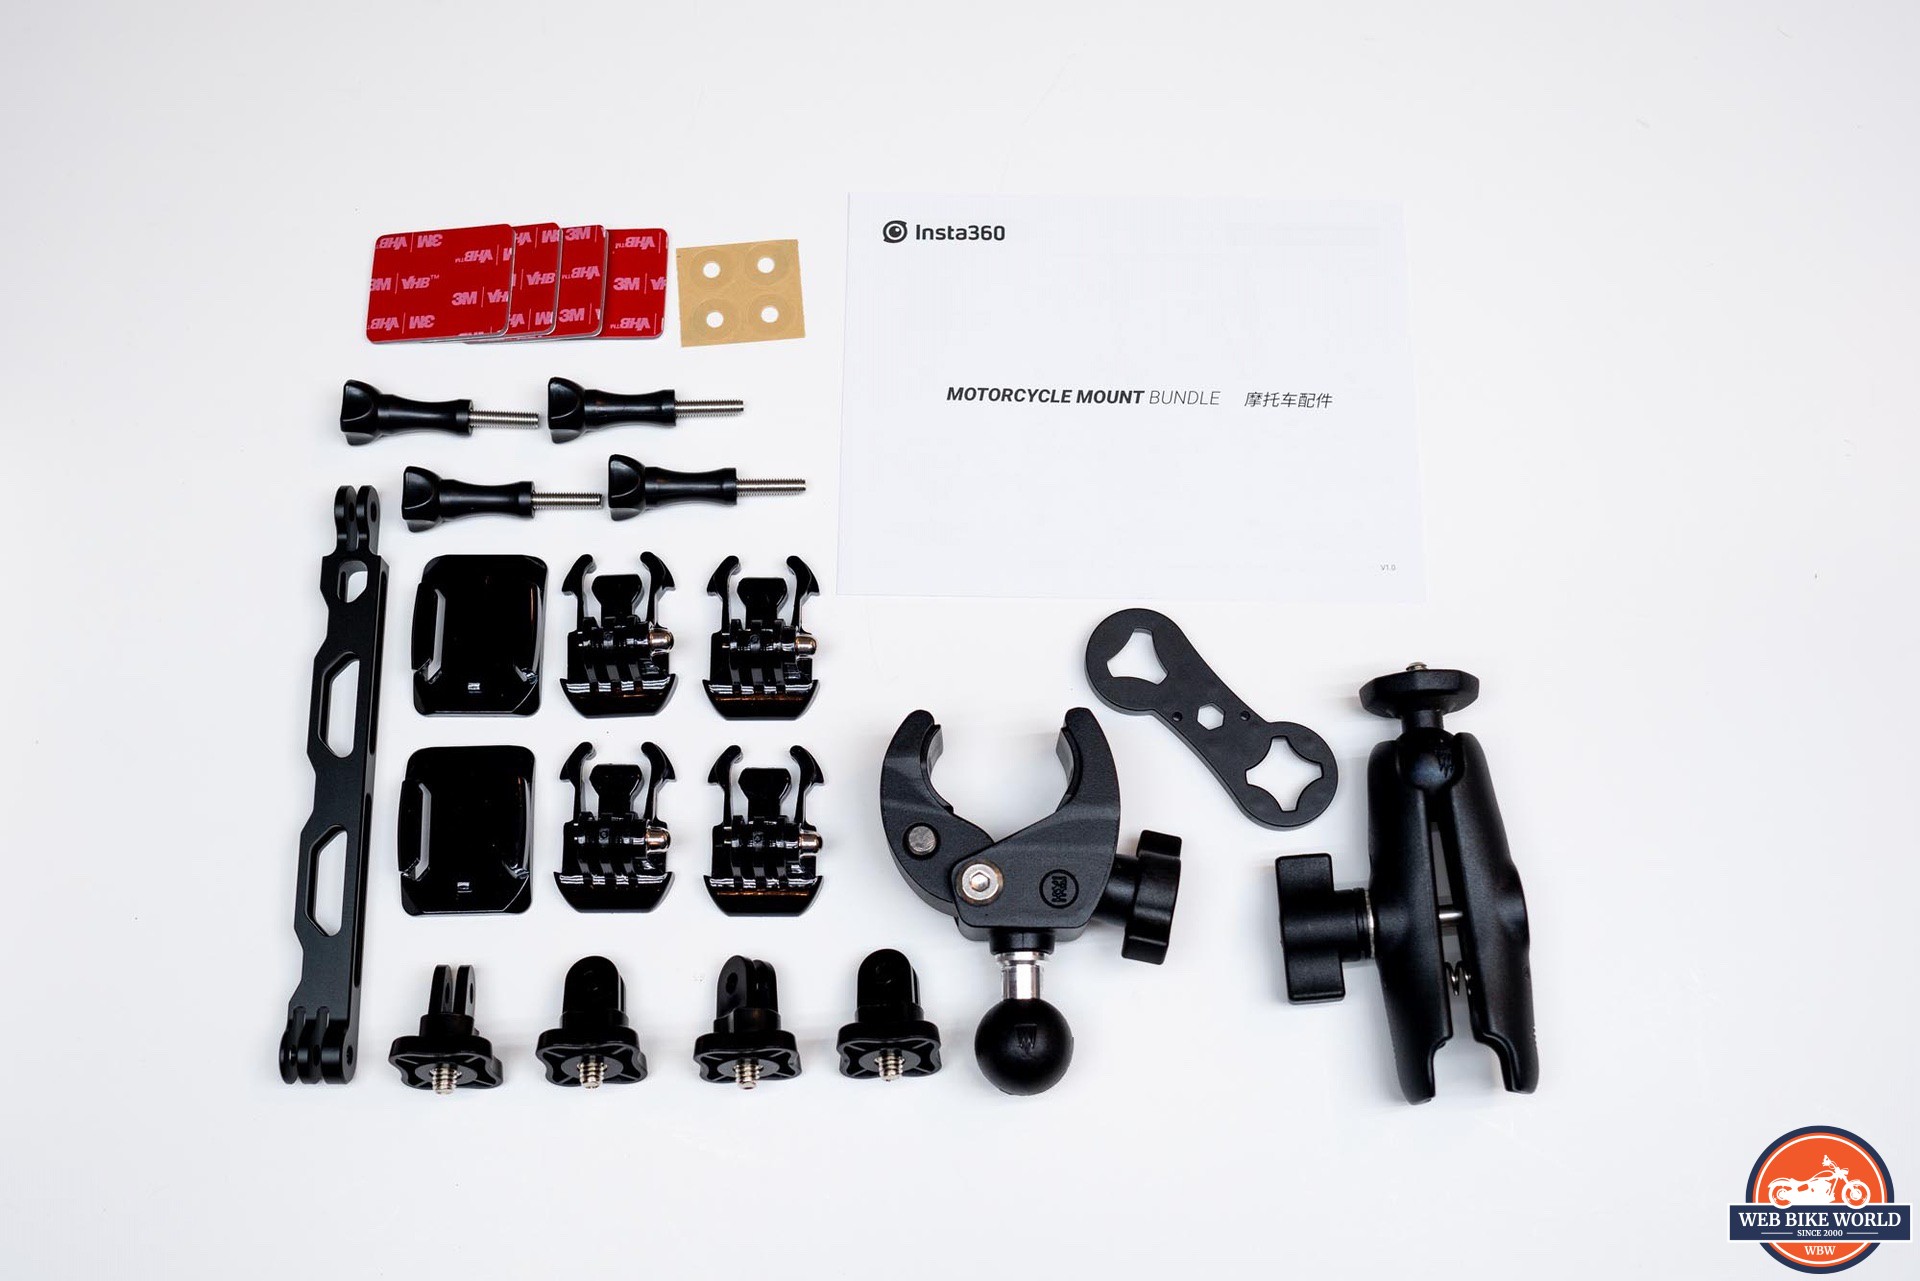 Claw mount and other mounting accessories for Insta360 One X2 Camera